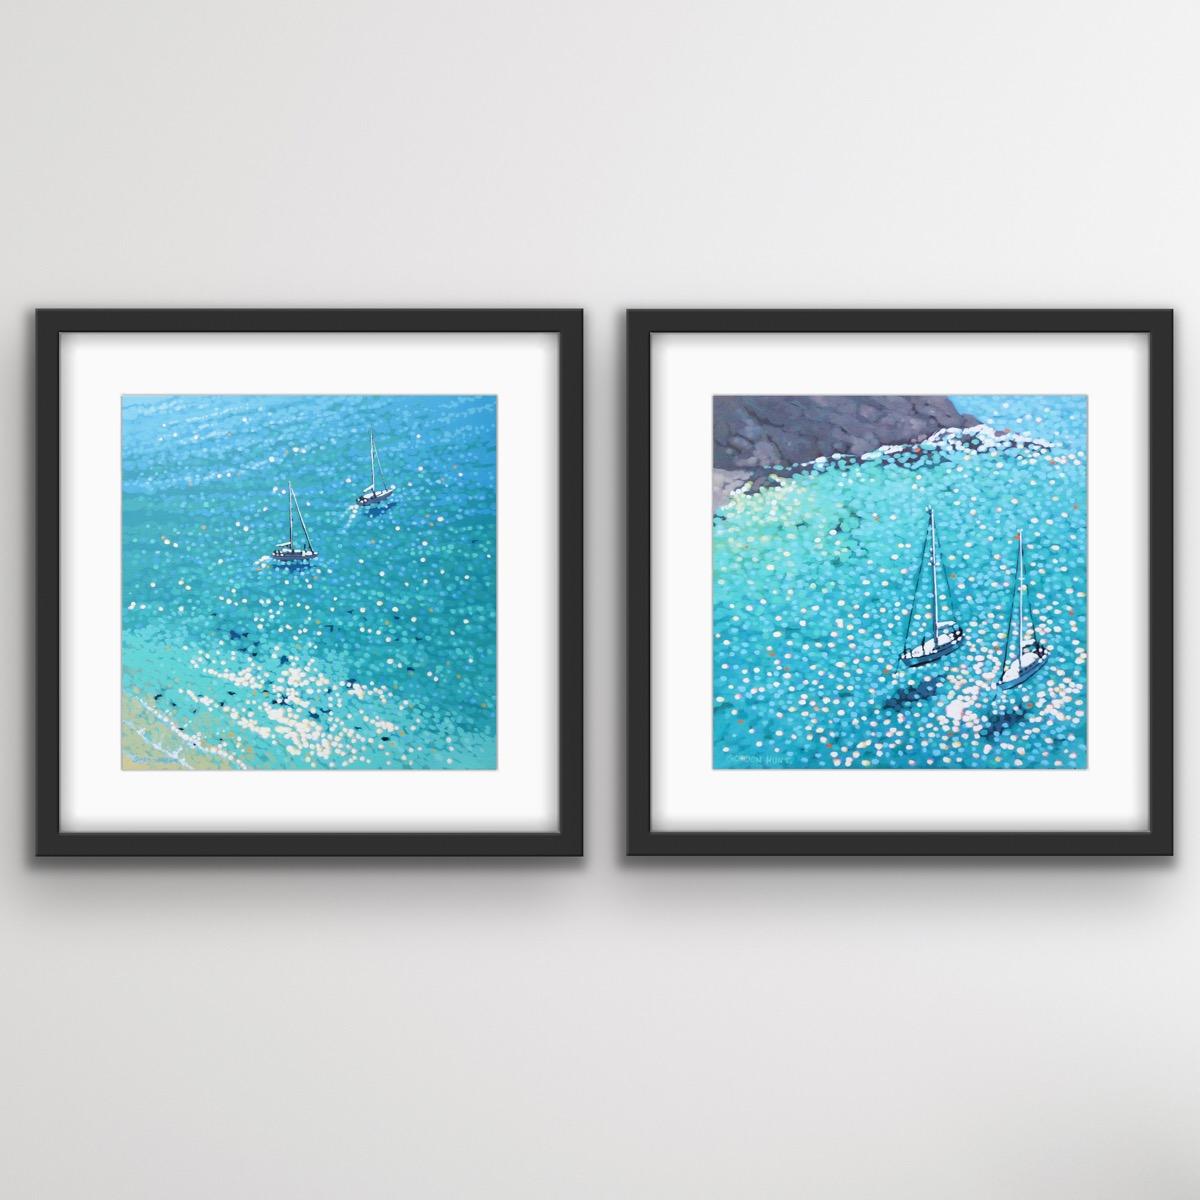 Turquoise Bay and Lantic Lunch (small) Diptych by Gordon Hunt [2019]

original
Limited Edition Print
Image size: H:20 cm x W:20 cm
Complete Size of Unframed Work: H:30 cm x W:30 cm x D:0.1cm
Sold Unframed
Please note that insitu images are purely an